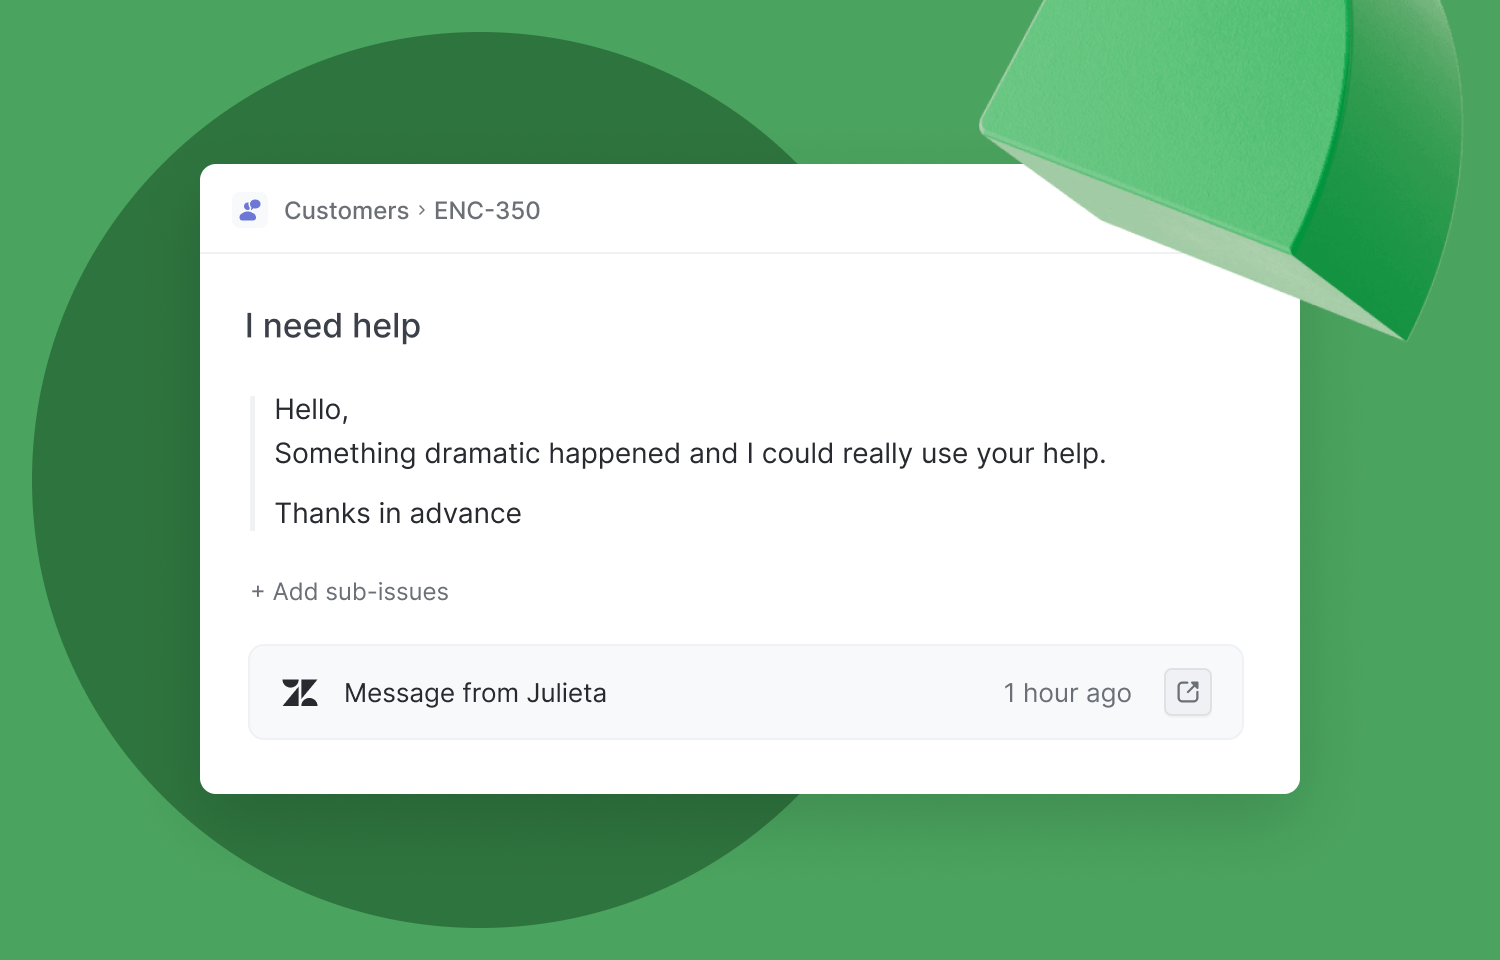 A Linear issue linked to Zendesk, showing the Zendesk ticket and quoted text from the customer